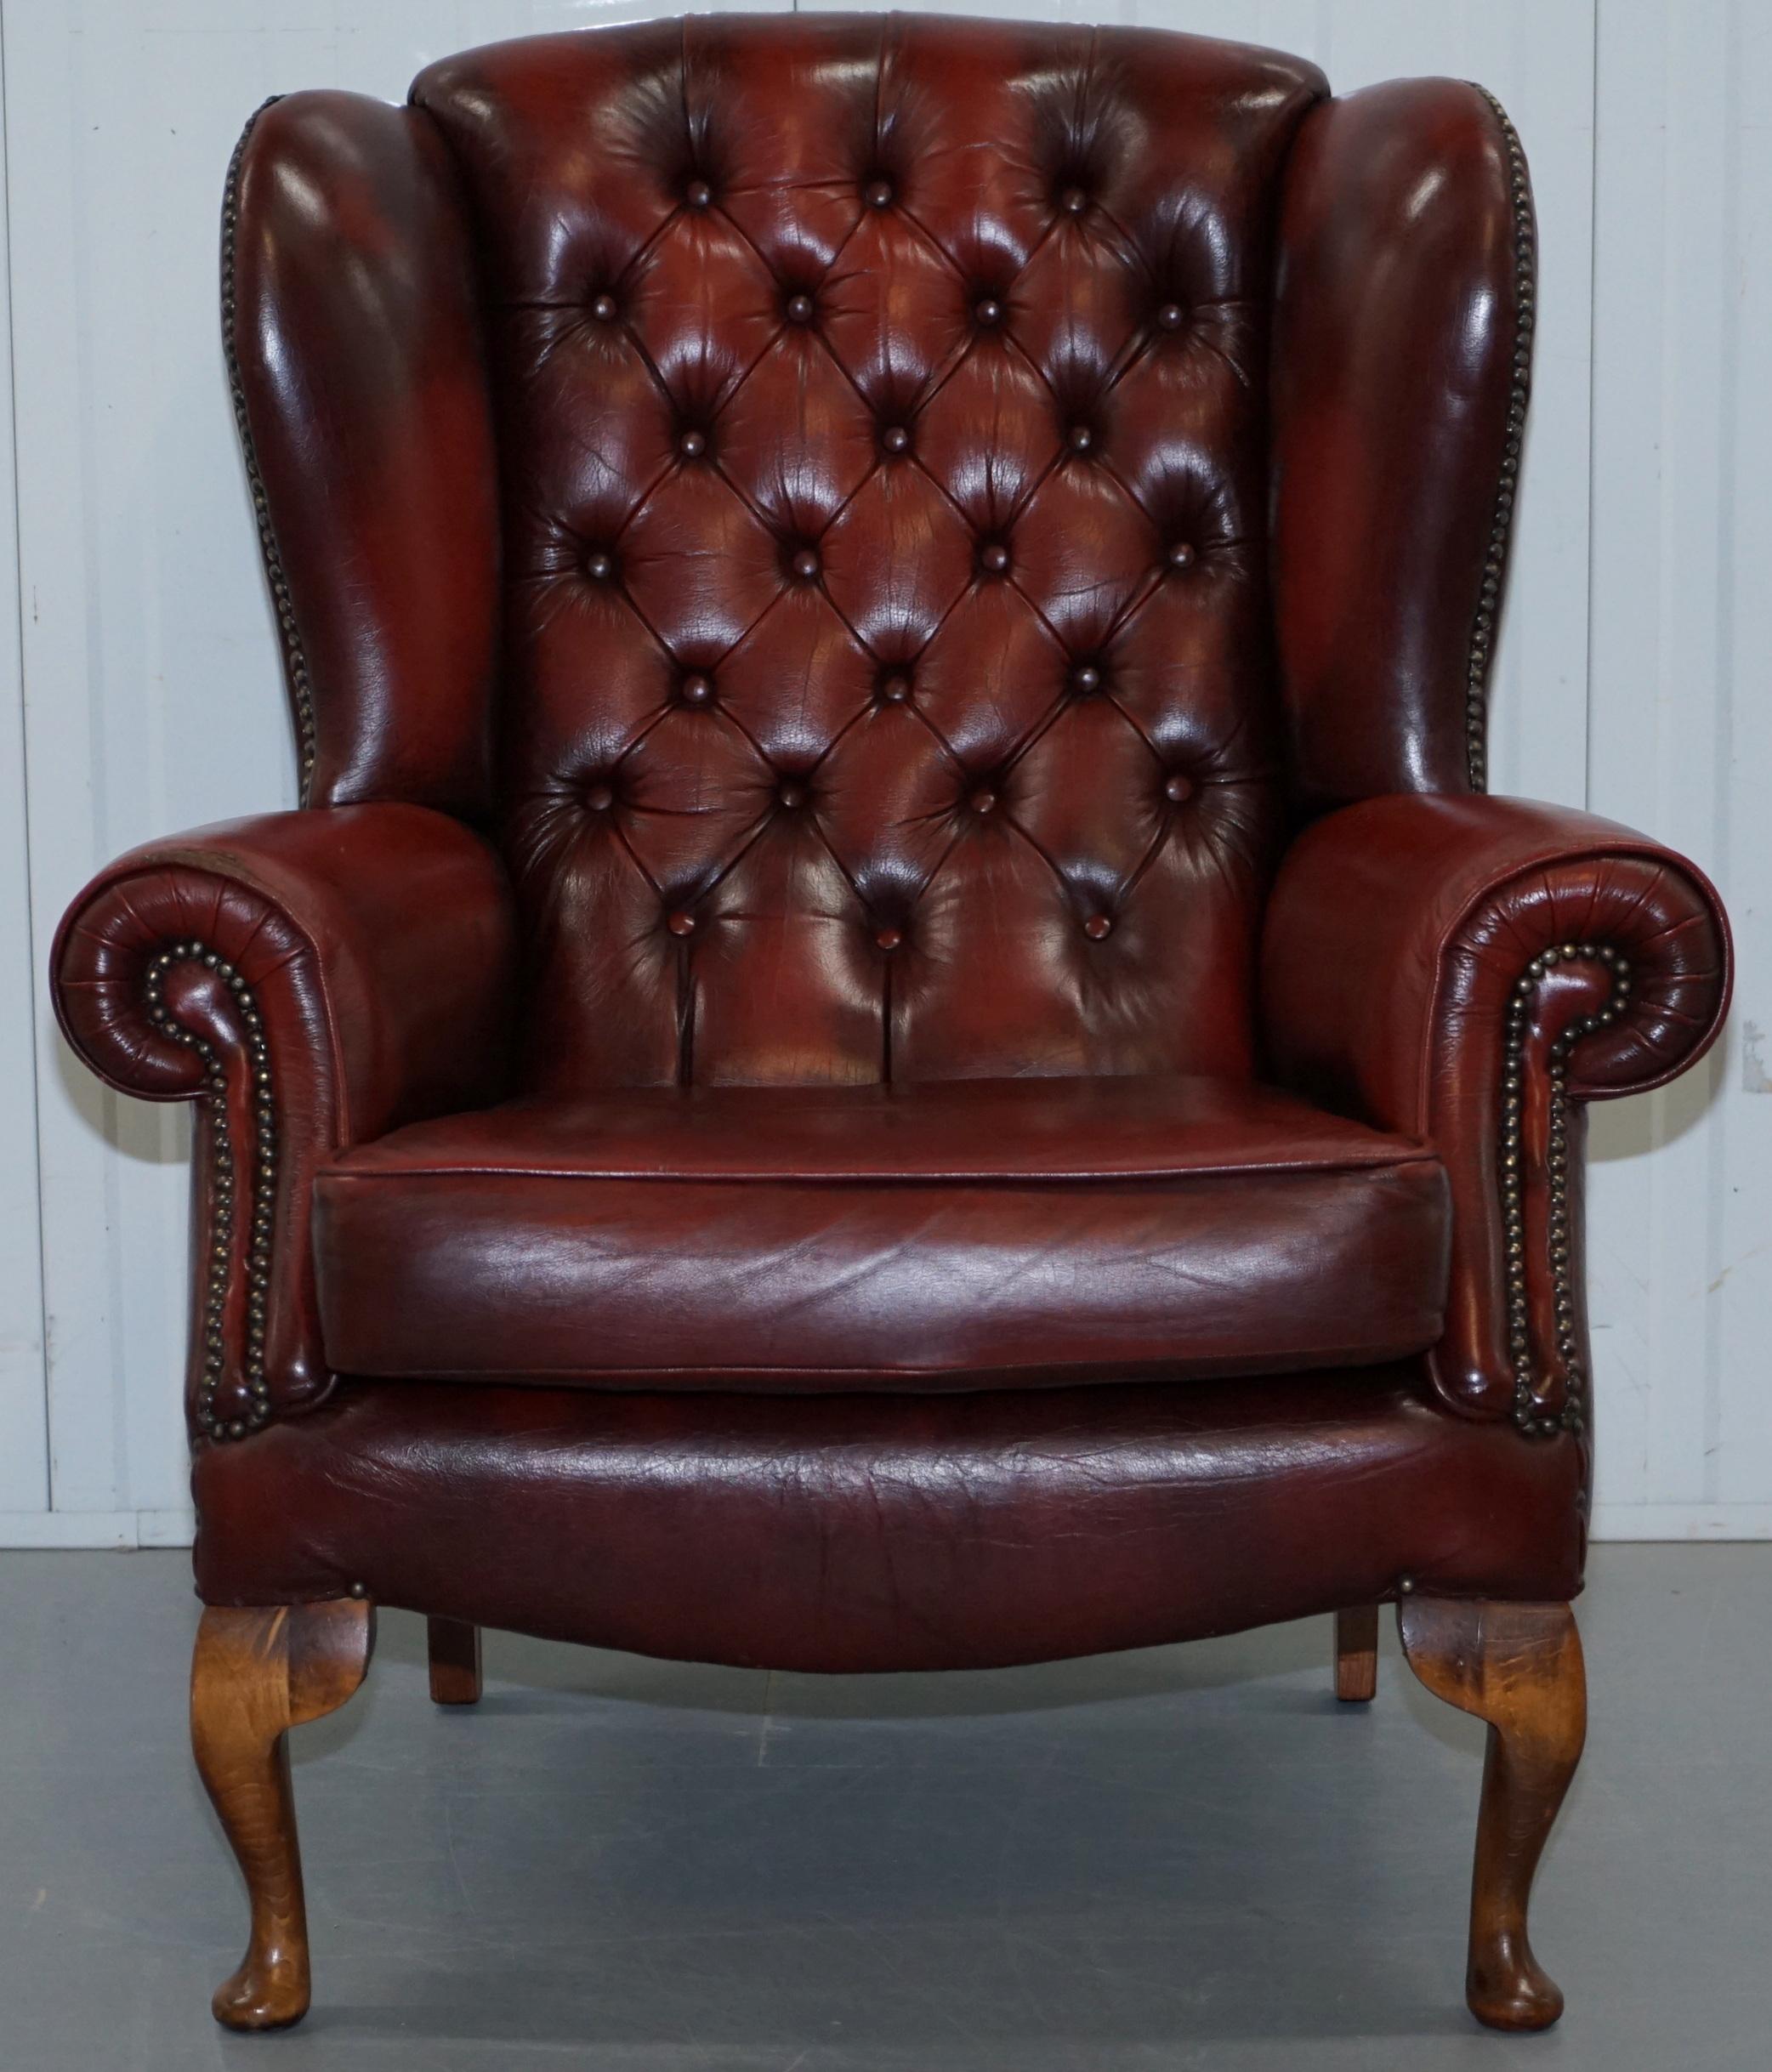 We are delighted to offer for sale this very nice hand dyed Oxblood leather Chesterfield wingback armchair

This piece is in lightly restored condition to include a deep clean hand condition wax and hand polish

Dimensions:

Height